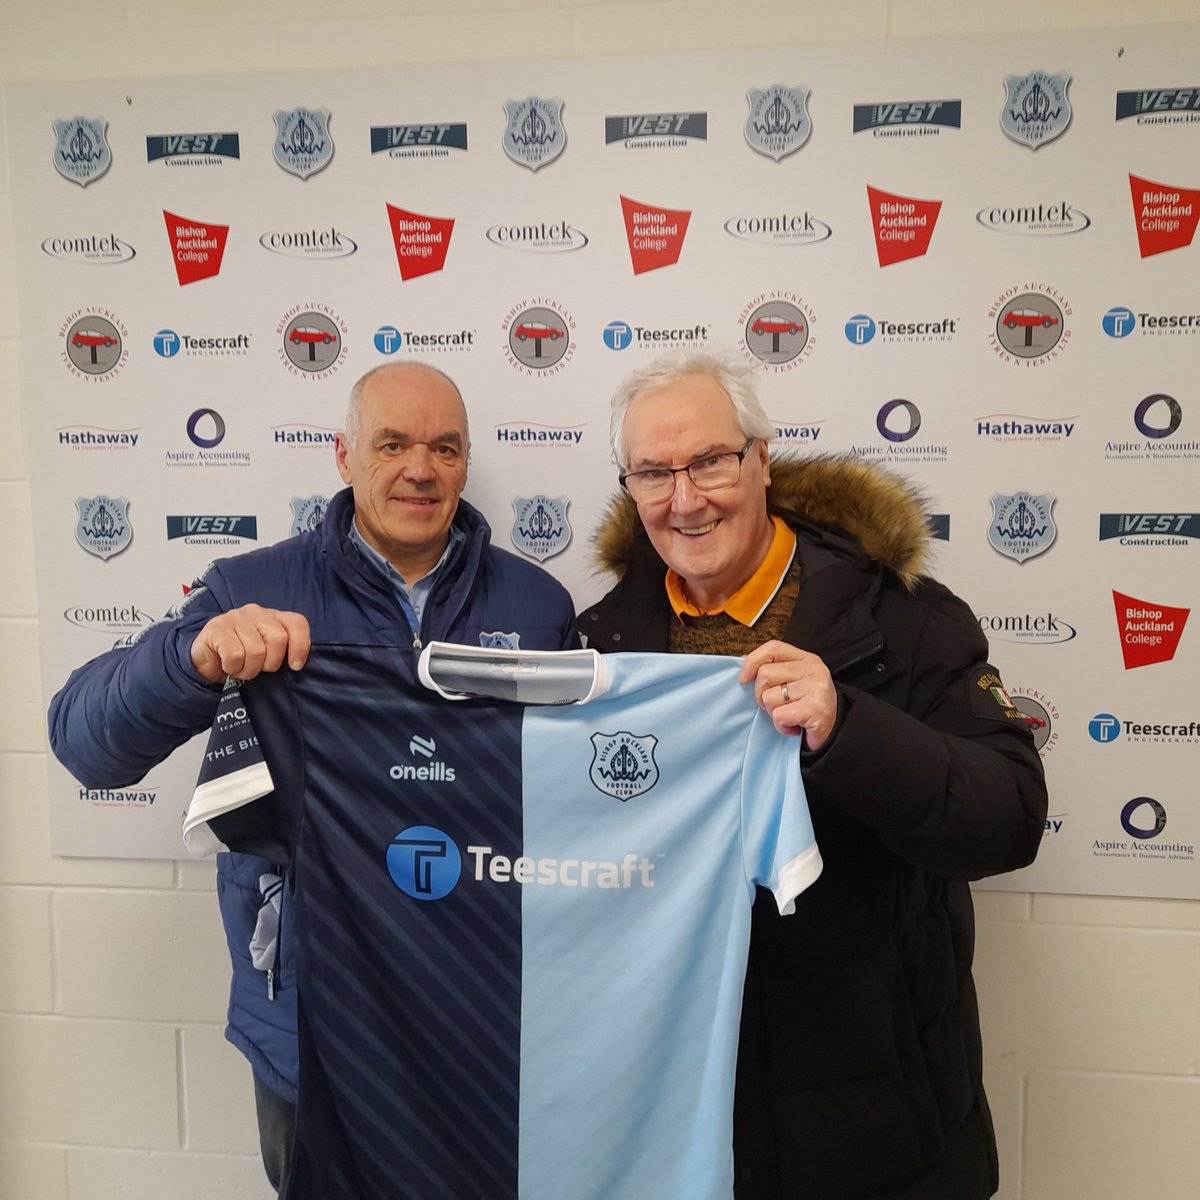 What a great weekend! Spoke at Bishop Auckland charity dinner, then today presented 2 brilliant Roy of the Rovers shirts to @bishopafc.It follows @PaulTrevillion informing he based Roy Race on Bobby Charlton. Bishop in turn presented one of their shirts for the @DuncanEdwardsTr